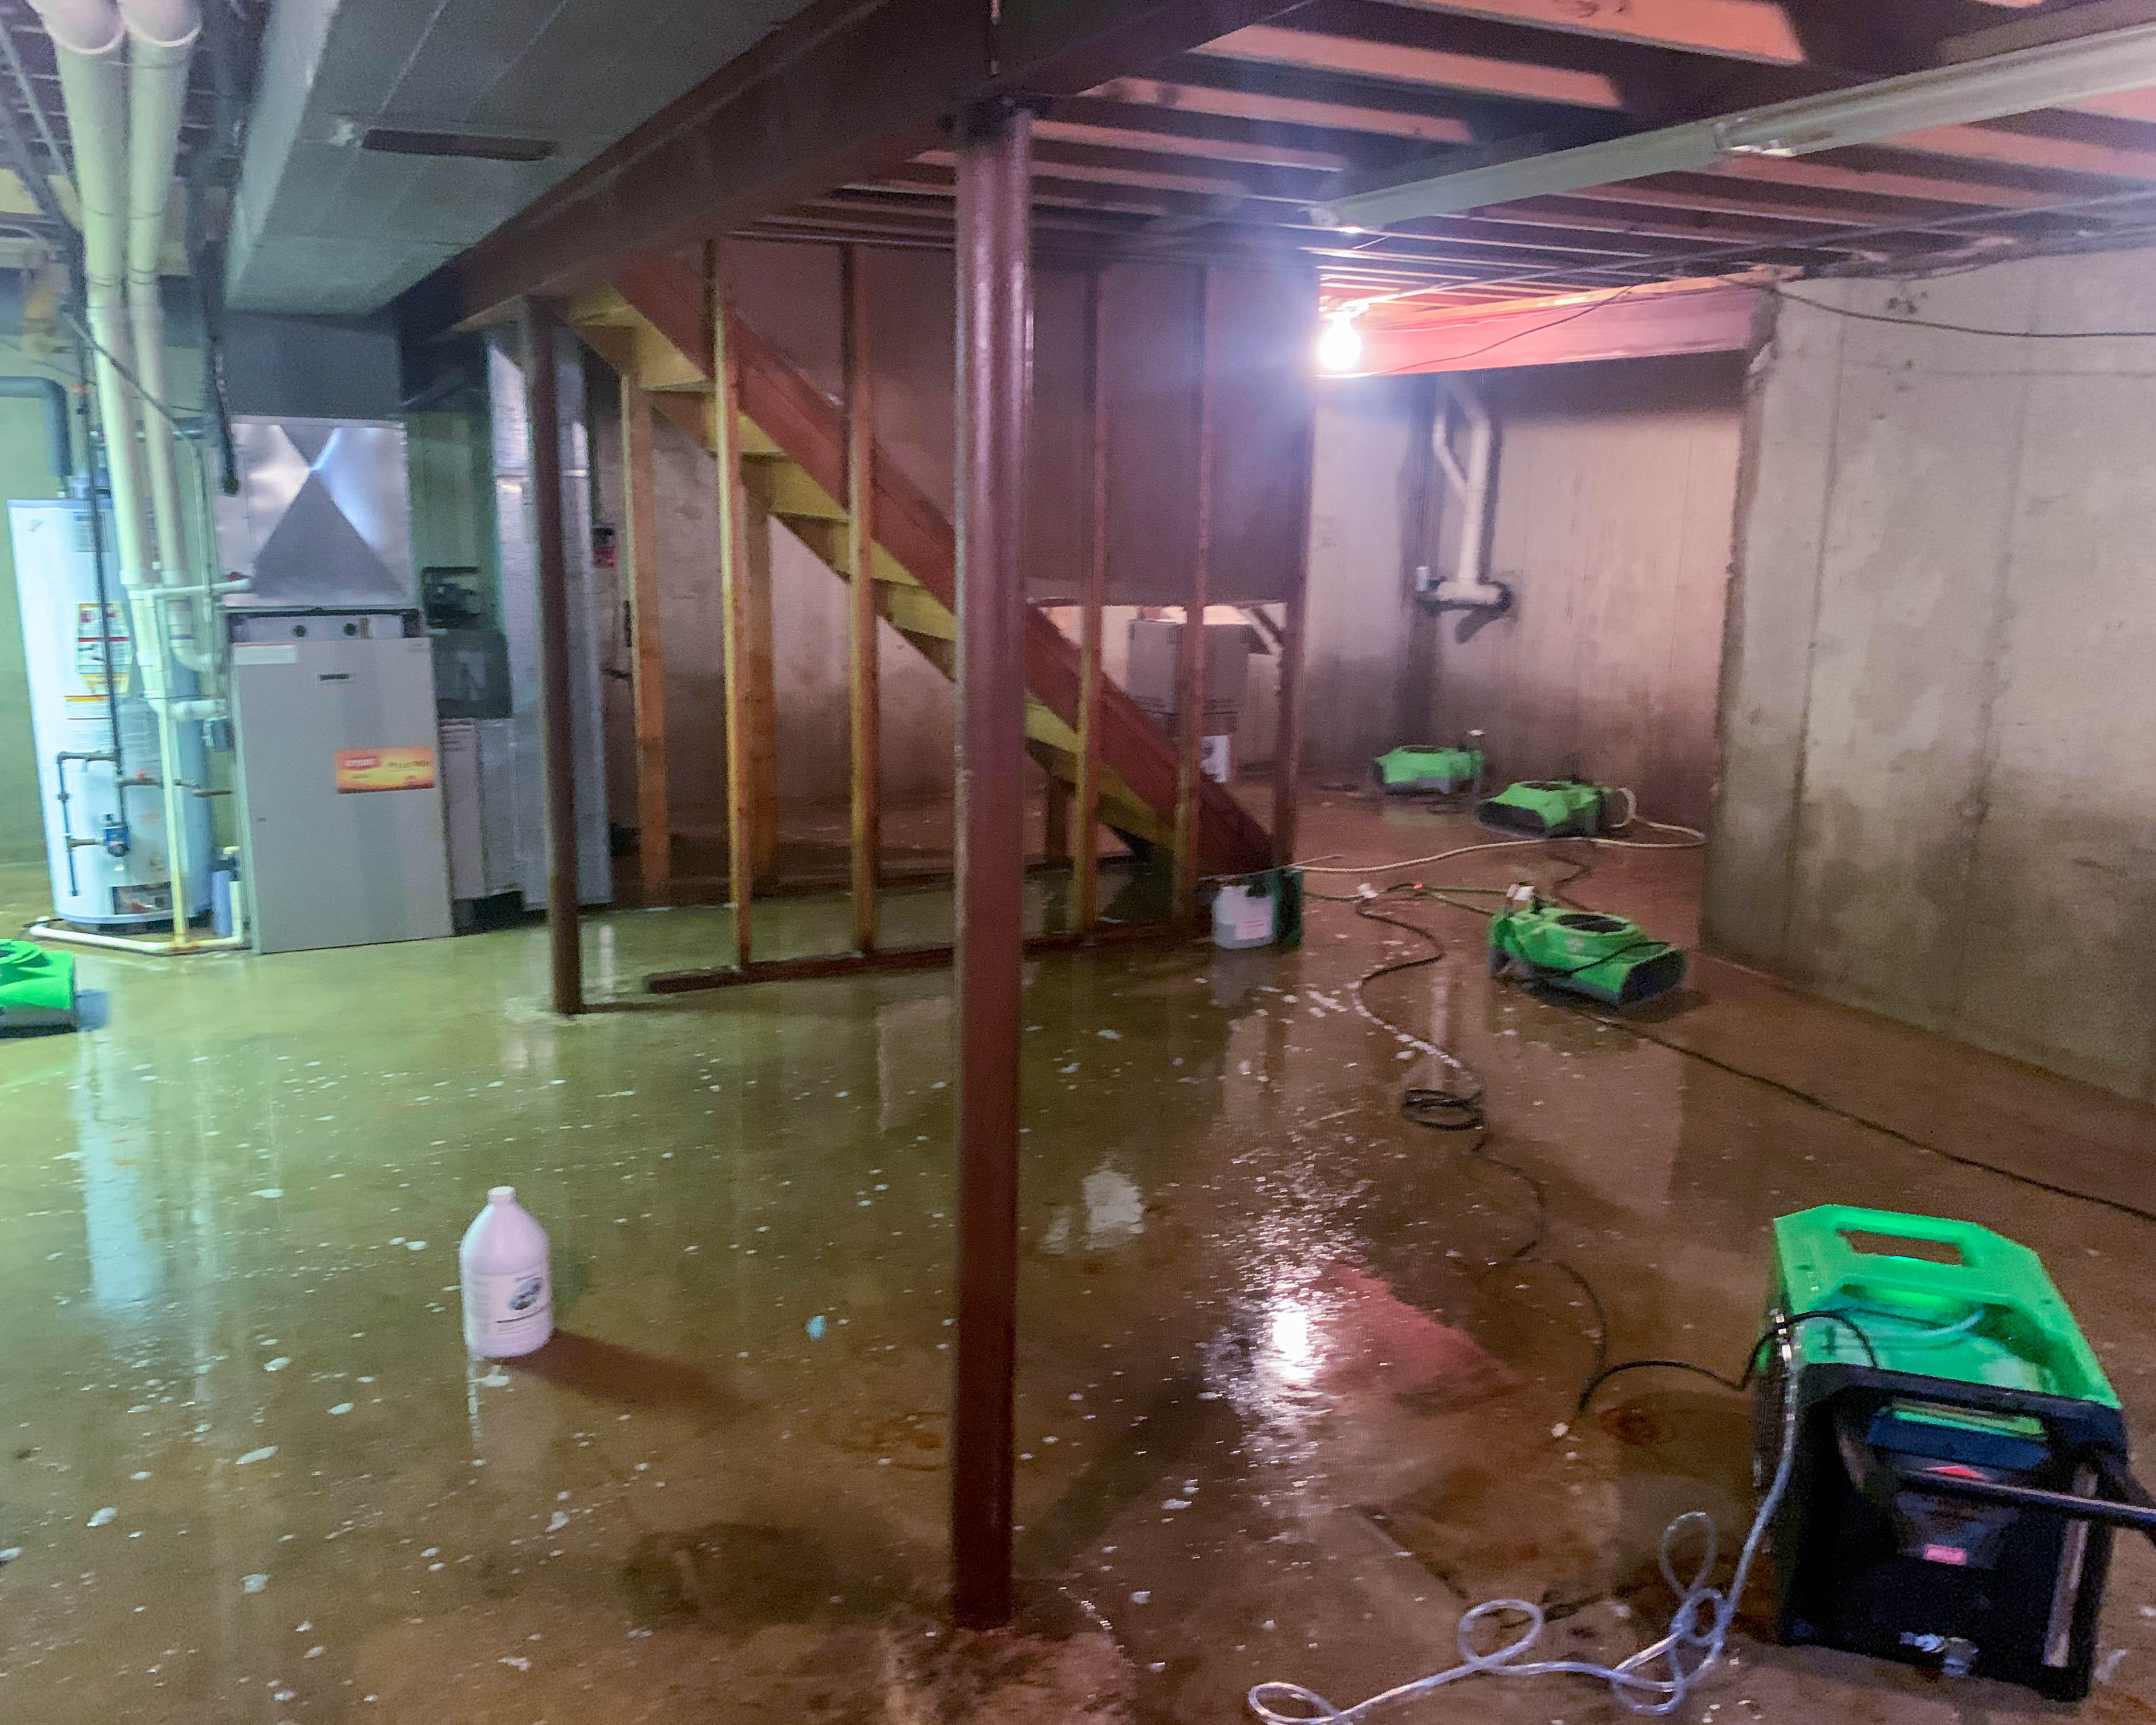 SERVPRO technicians are trained to handle all types of water damage situations, including flooded basements. We're available 24/7 to respond quickly and work directly with you to restore your property after a flood.